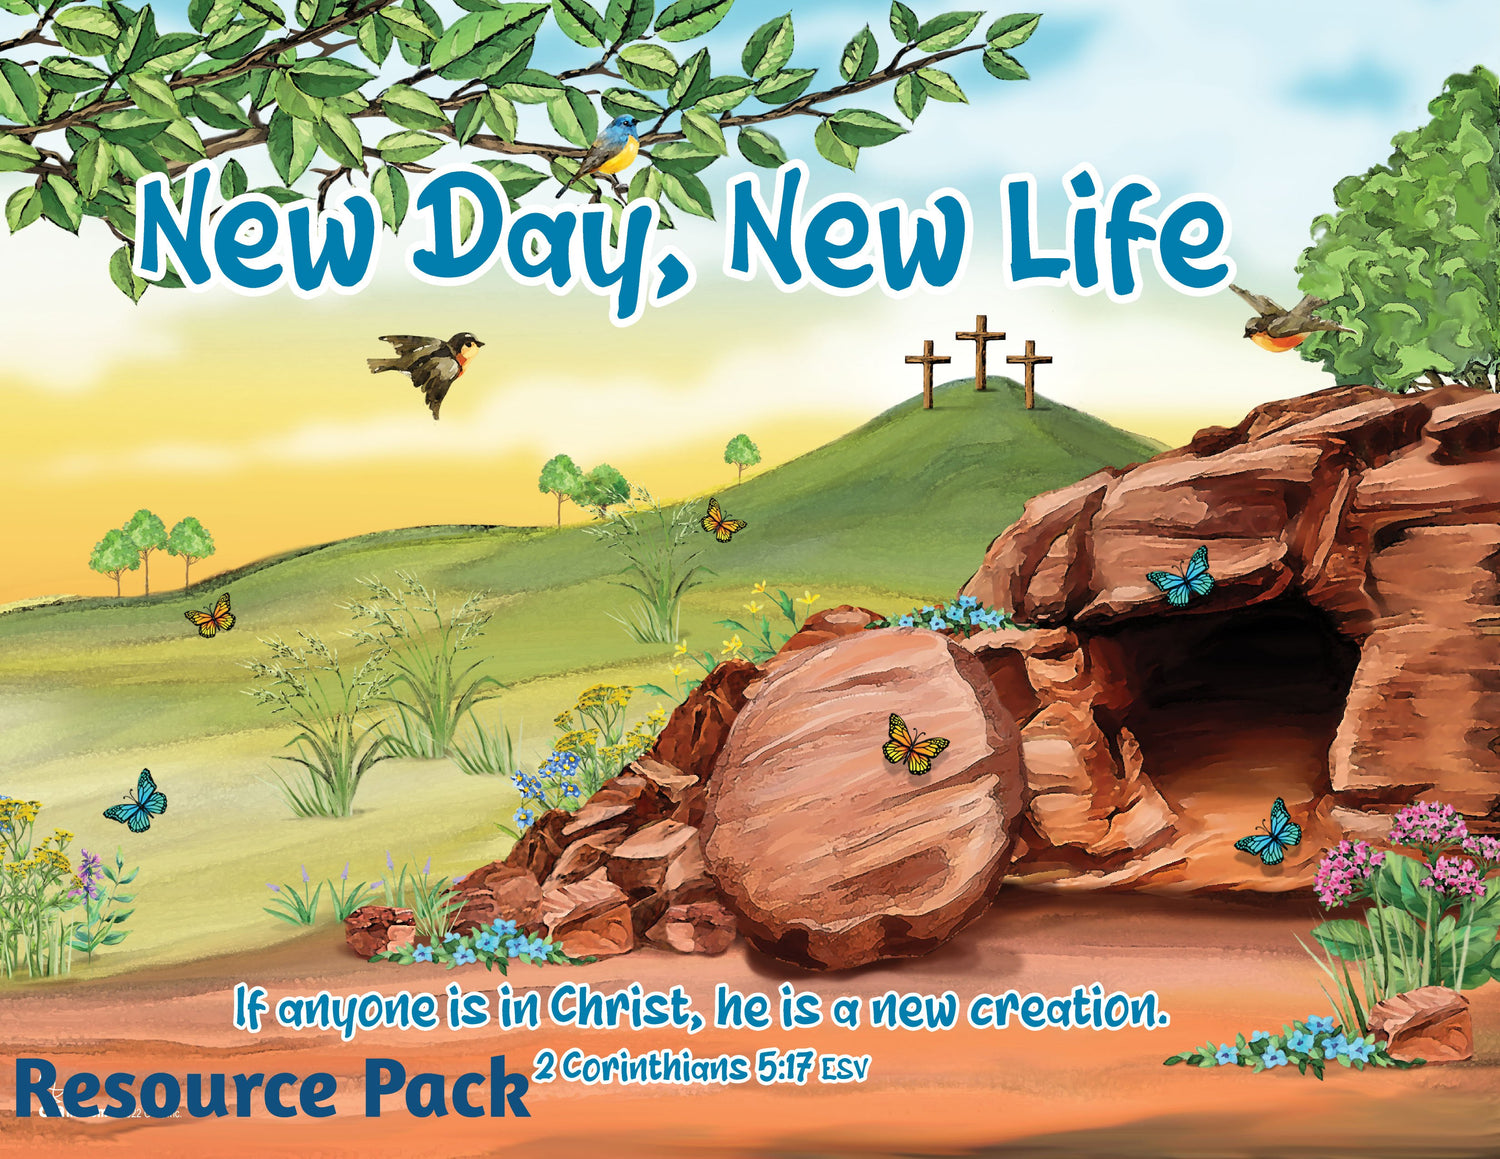 Resource Pack - New Day, New Life